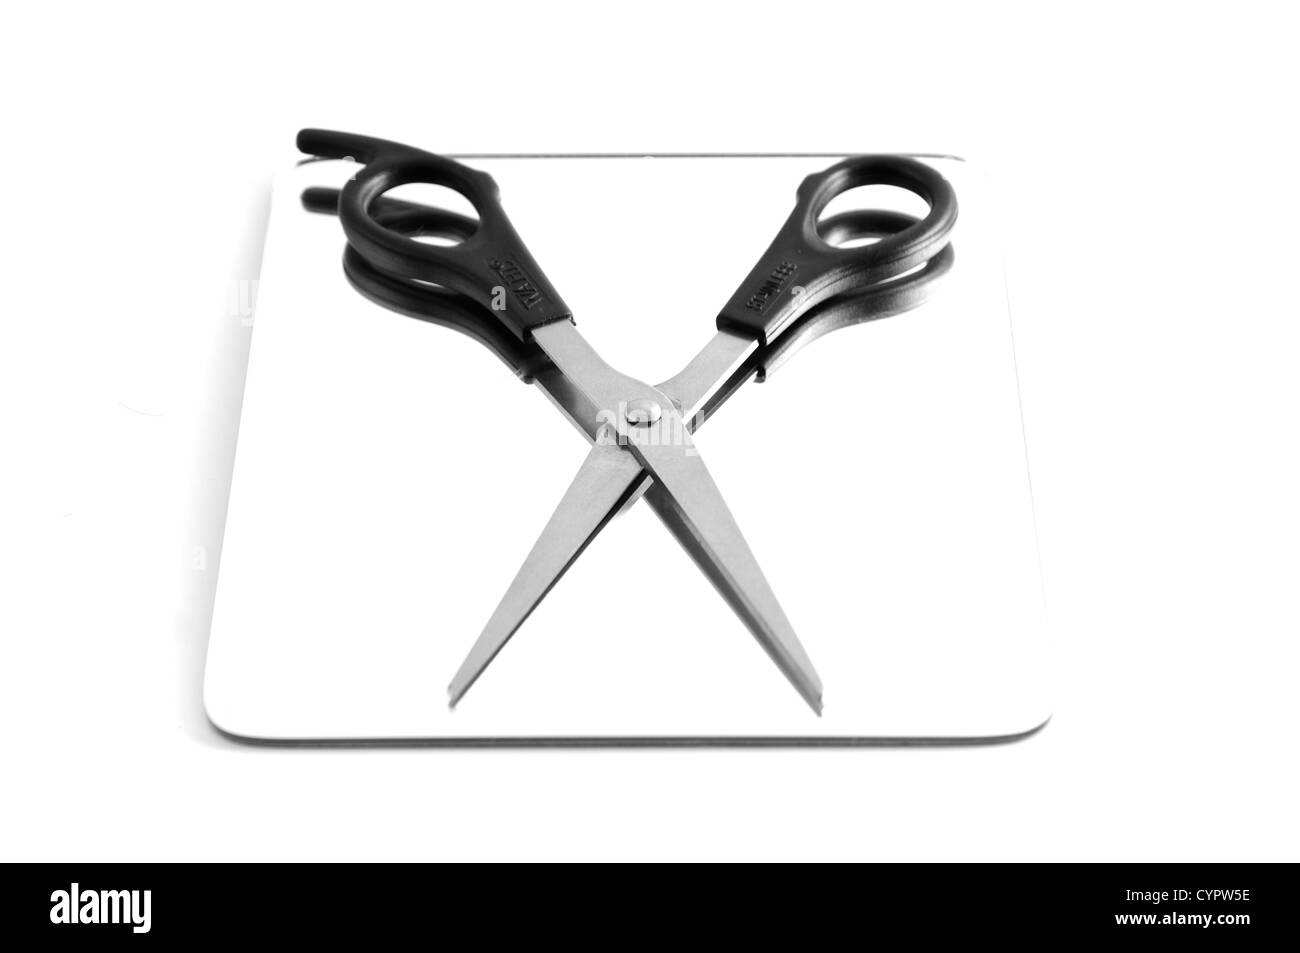 Isolated Hairdressers scissors lying on top of a mirror Stock Photo